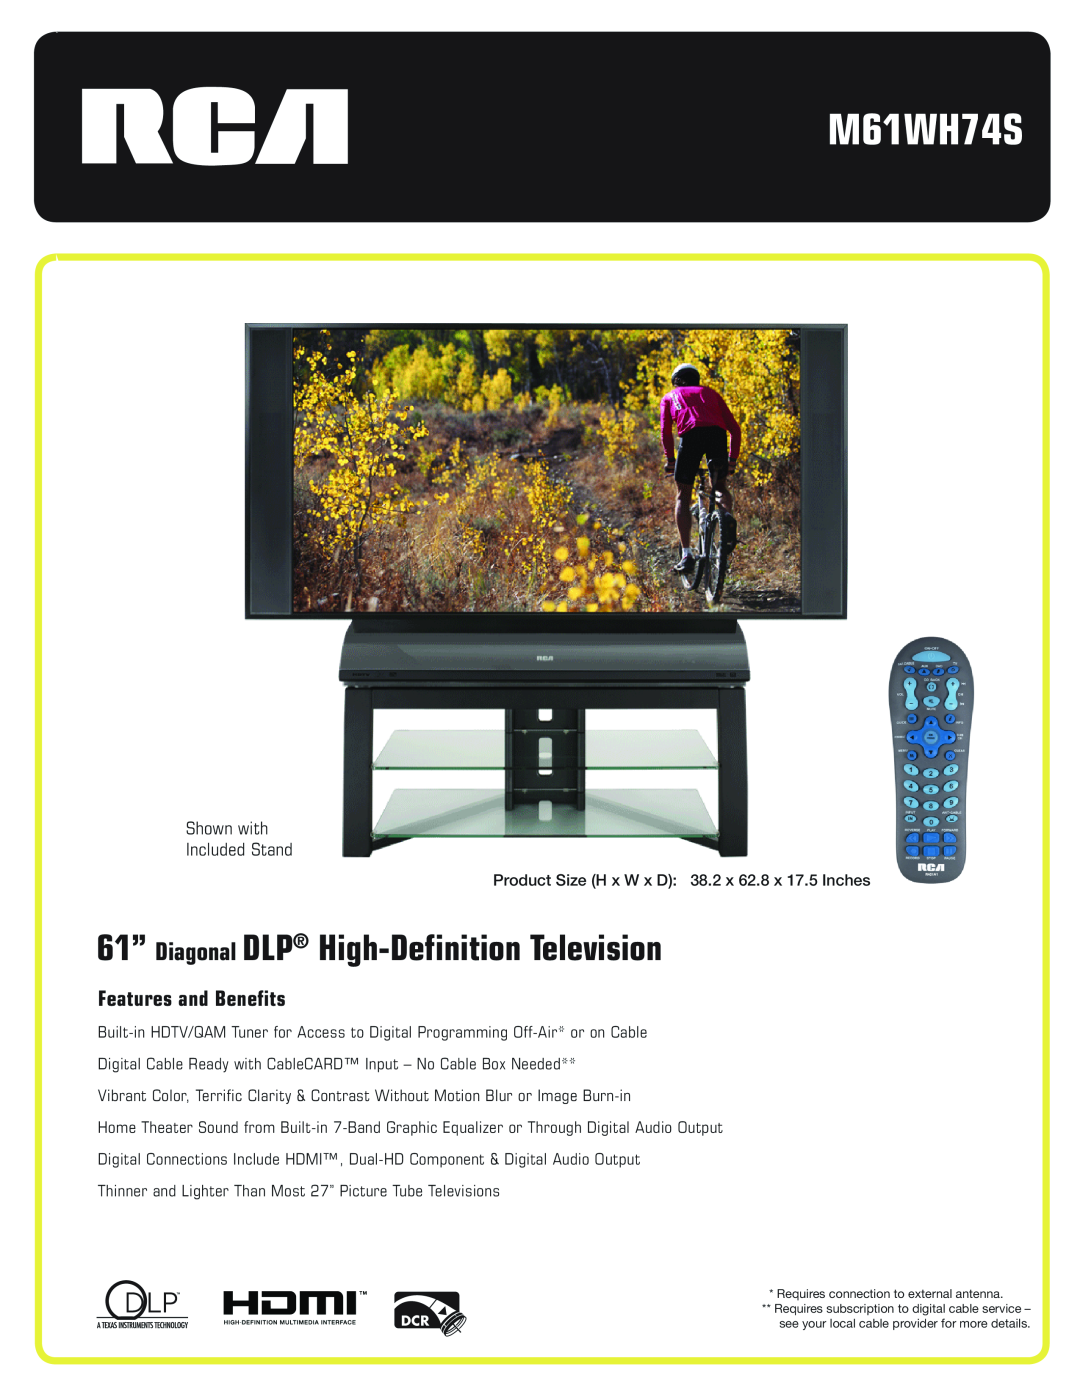 RCA M61WH74S manual 61” Diagonal DLP High-Definition Television, Features and Benefits, Shown with Included Stand 